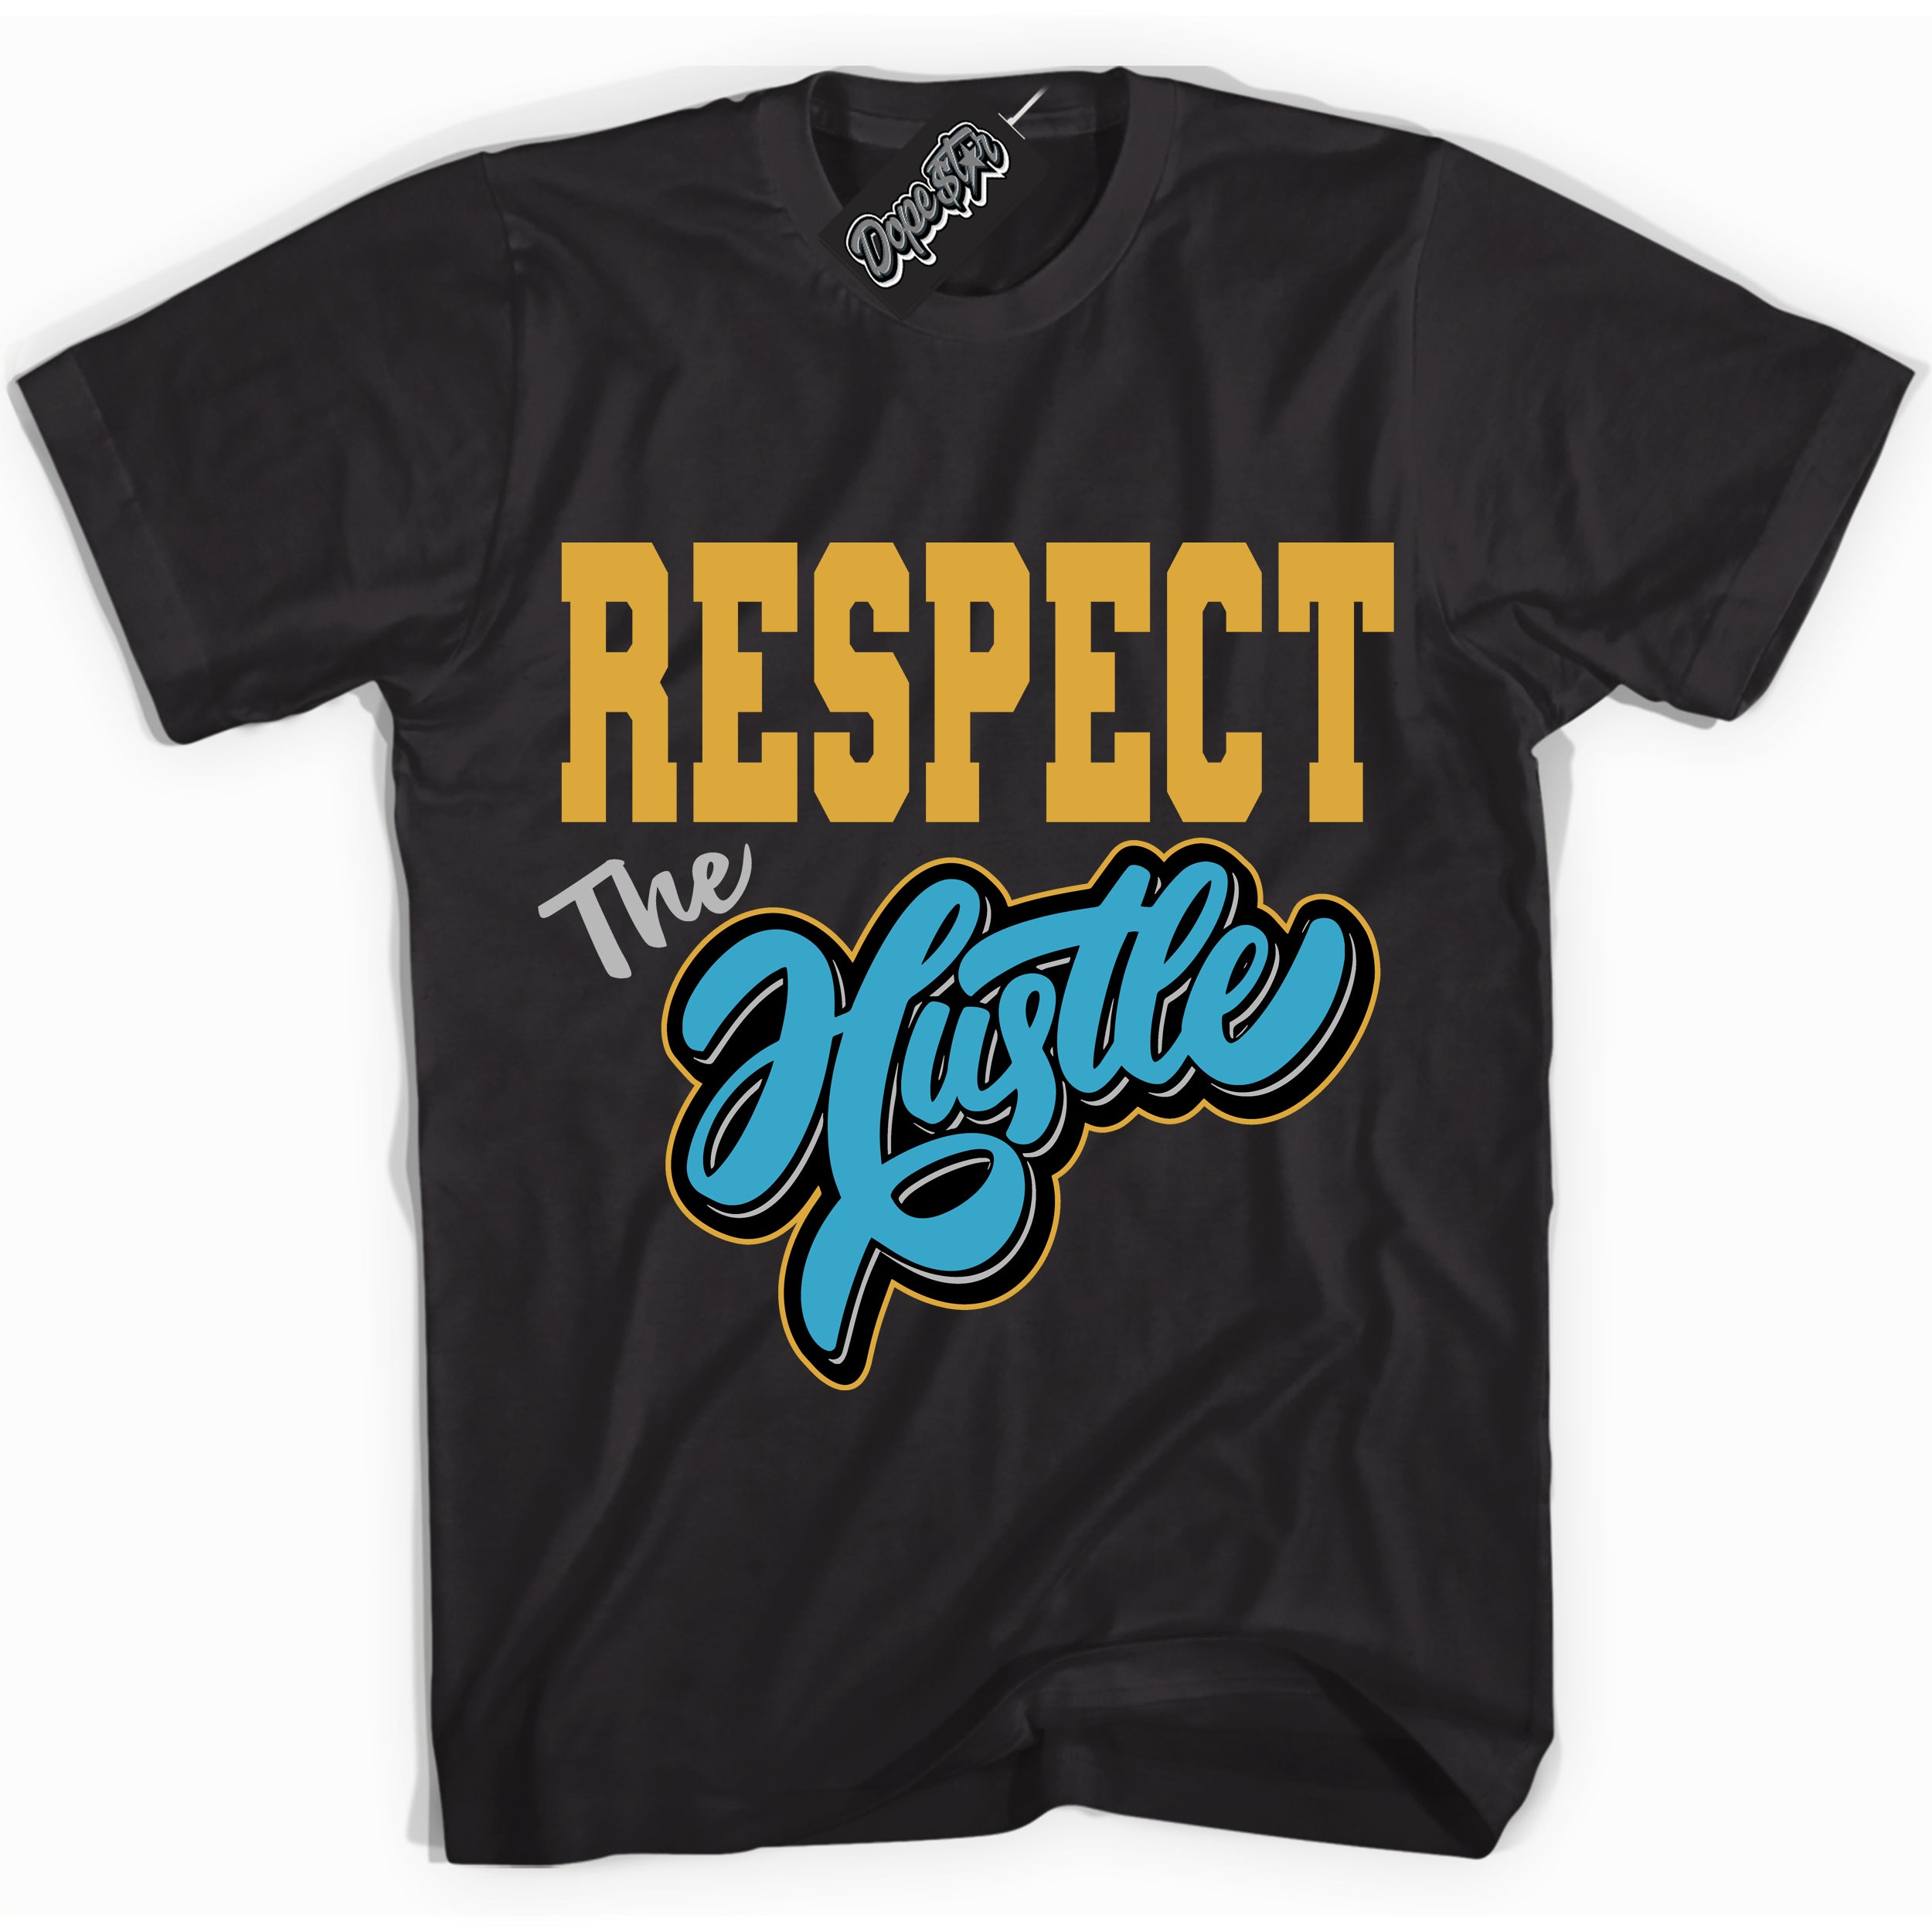 Cool Black Shirt with “ Respect The Hustle” design that perfectly matches Aqua 5s Sneakers.